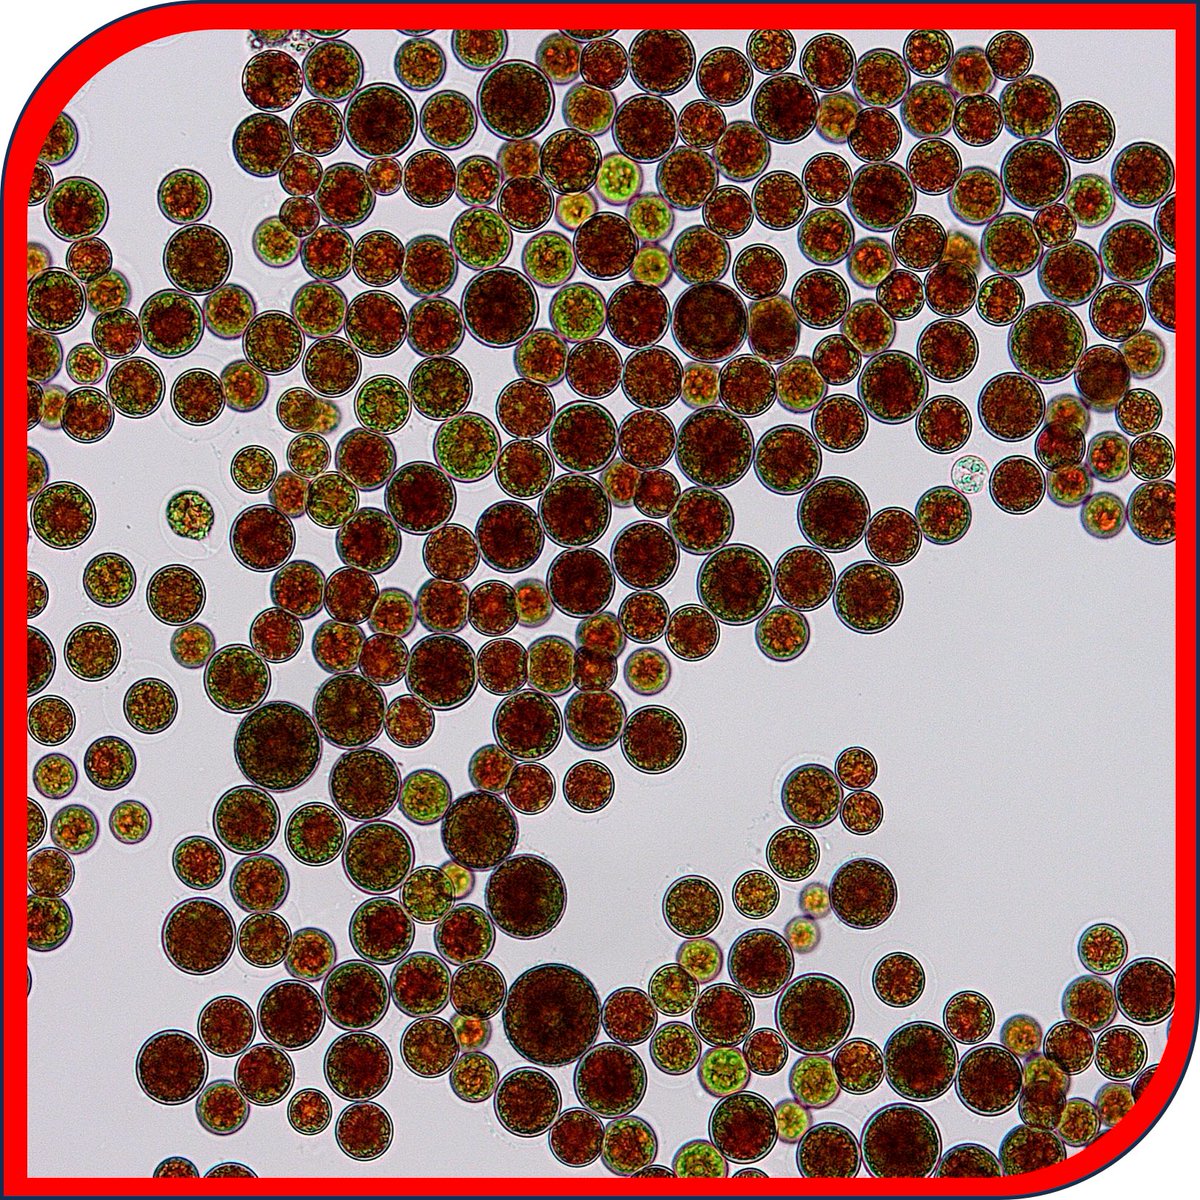 #microbeofthemonth: Haematococcus lacustris (DCG 0565)

This #microalgae is well known for its astaxanthin production during stress conditions. When taken up through the food chain, this pigment is responsible for the pink colour of flamingo’s.

bccm.belspo.be/catalogues/bm-…

@belspo